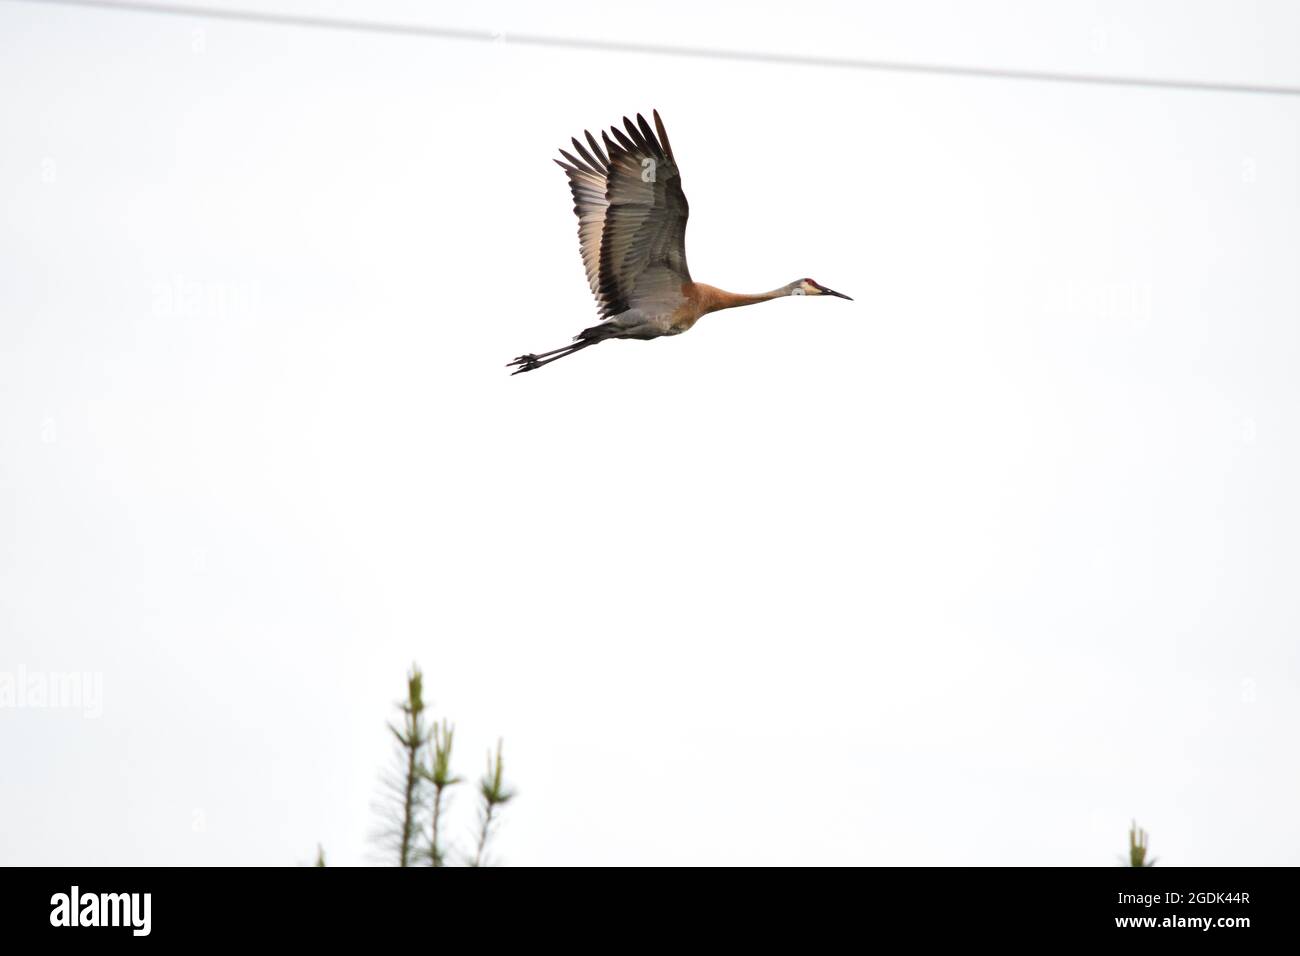 Sandhill Crane flying by on an overcast day Stock Photo